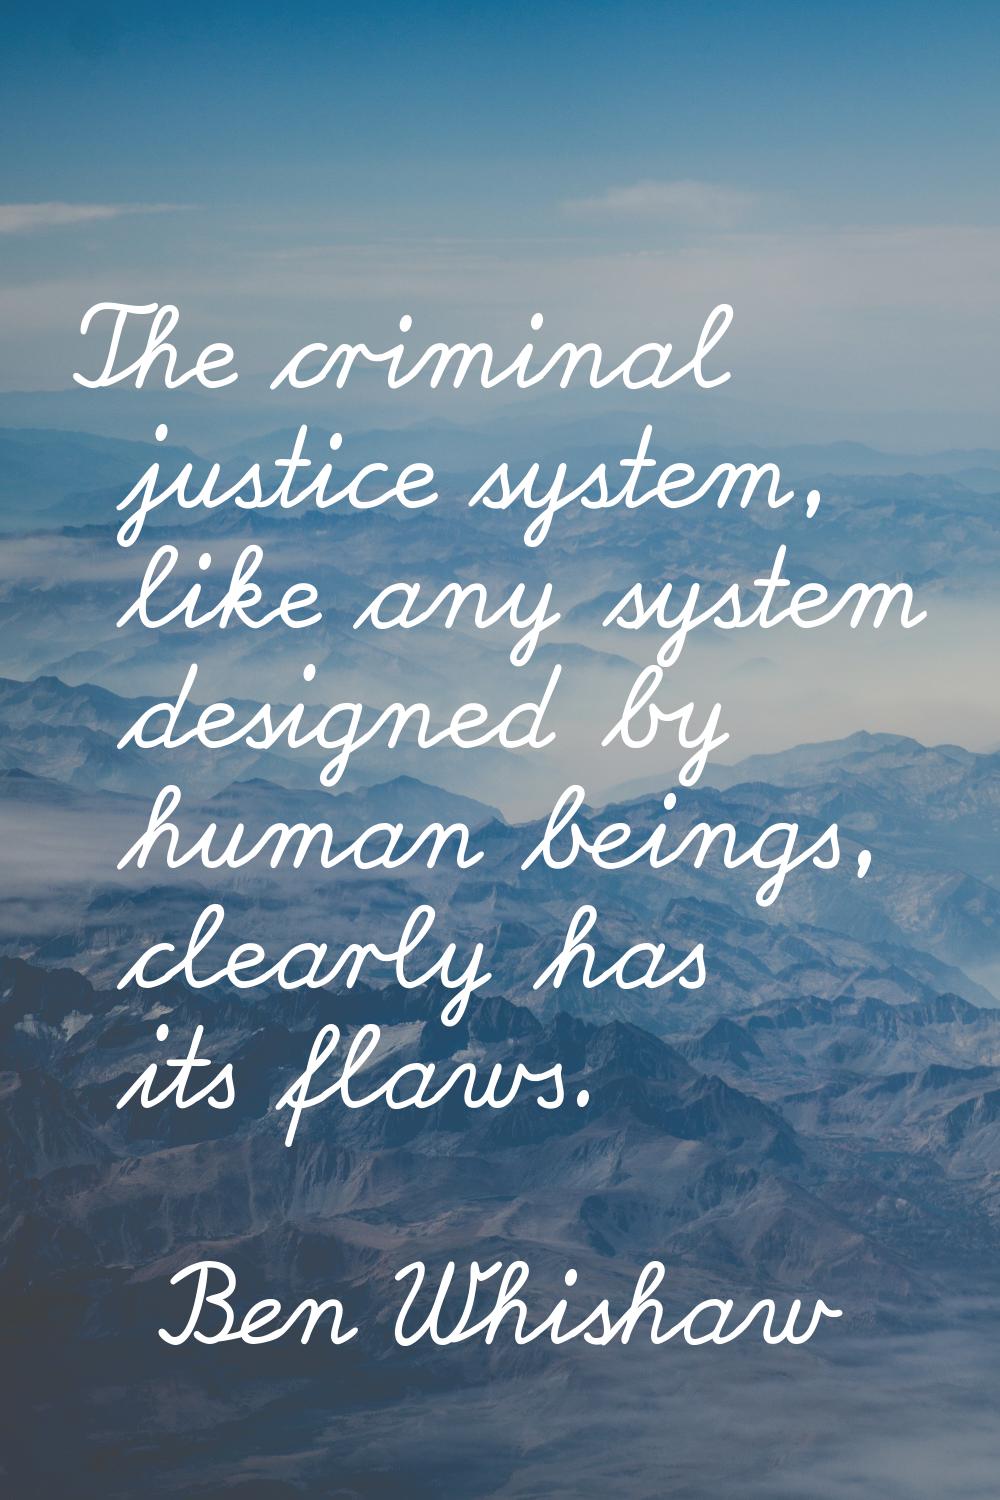 The criminal justice system, like any system designed by human beings, clearly has its flaws.